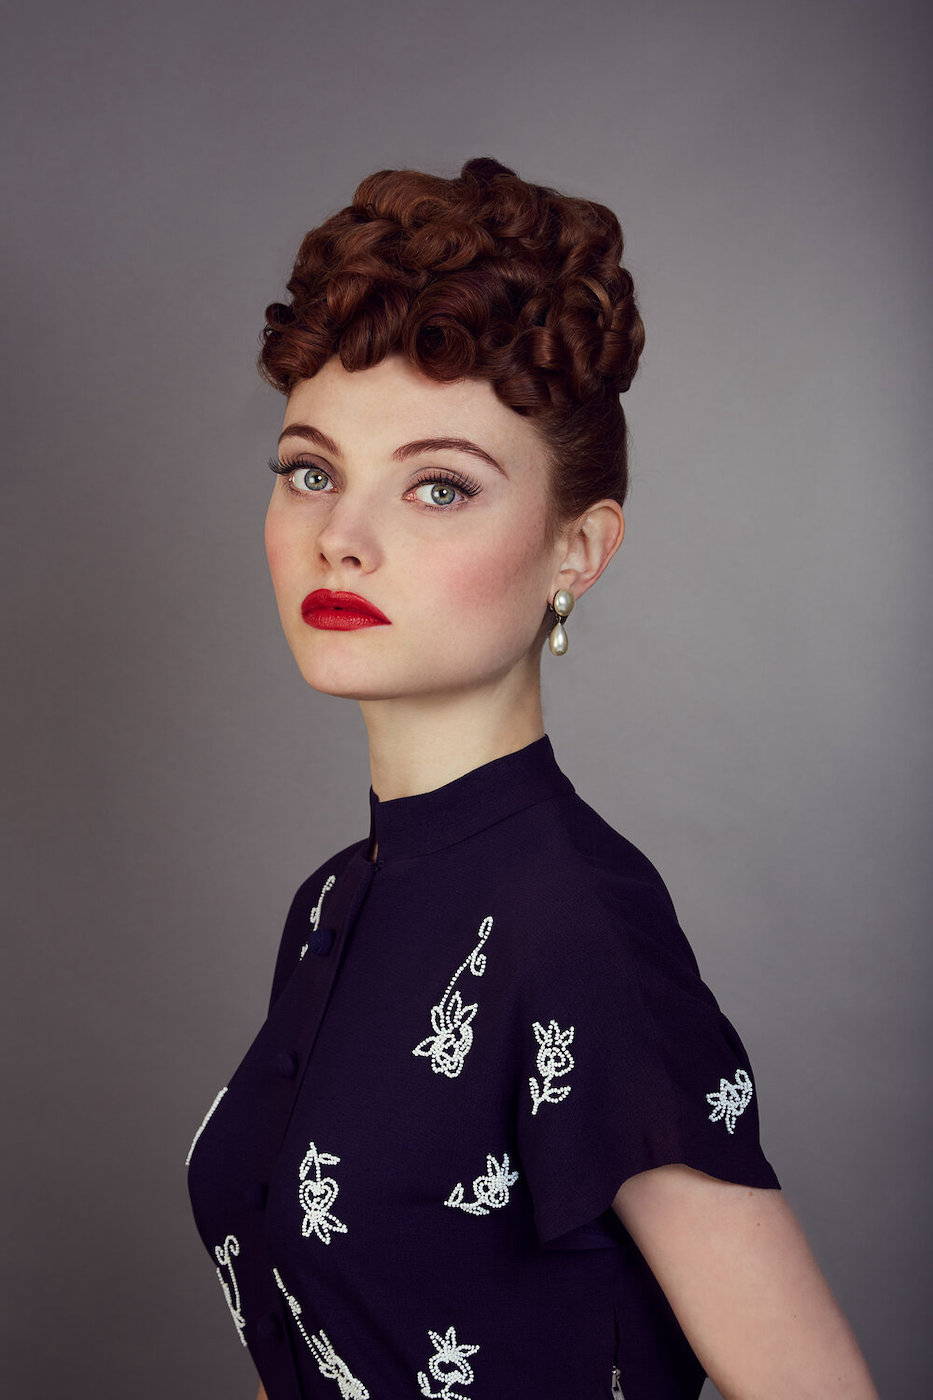 Model with authentic 1940s style hair and make-up